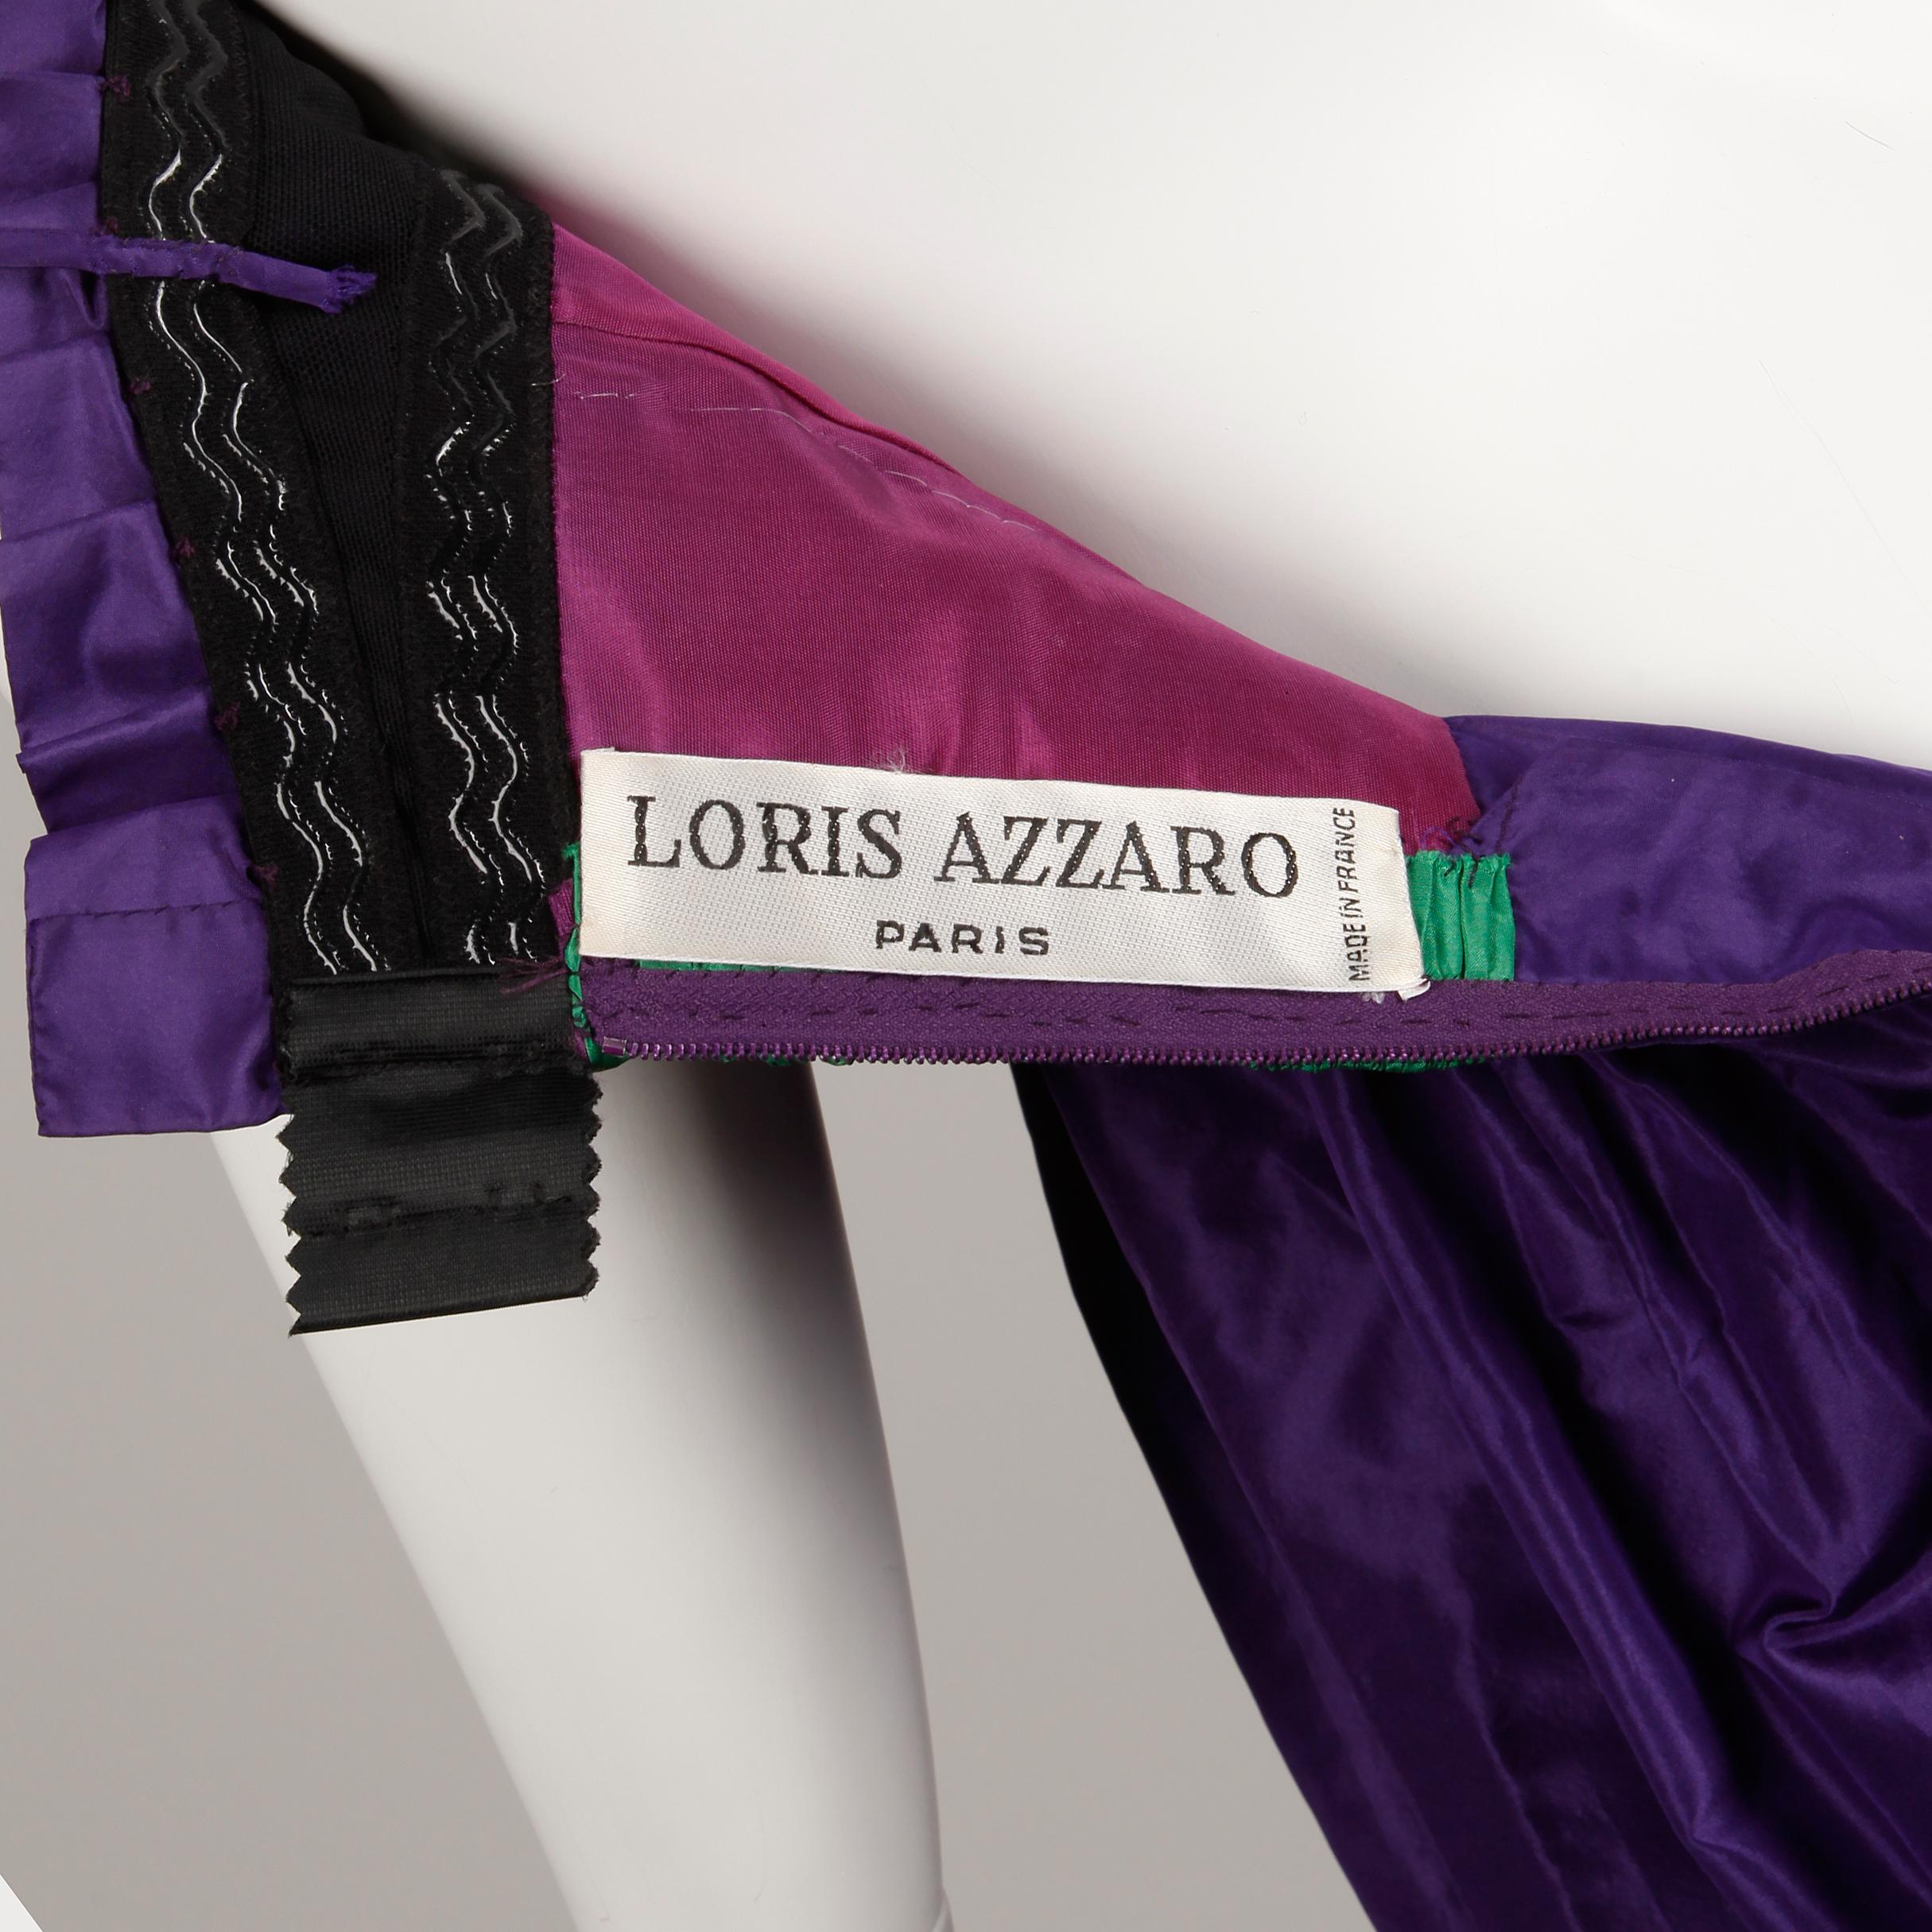 Beautiful vintage evening gown by Loris Azzaro in a deep purple silk taffeta fabric with a green silk taffeta empire waist detail. Partially lined with rear zip and hook closure. Built in underwire bra. Fits like a modern size XS-S. The bust